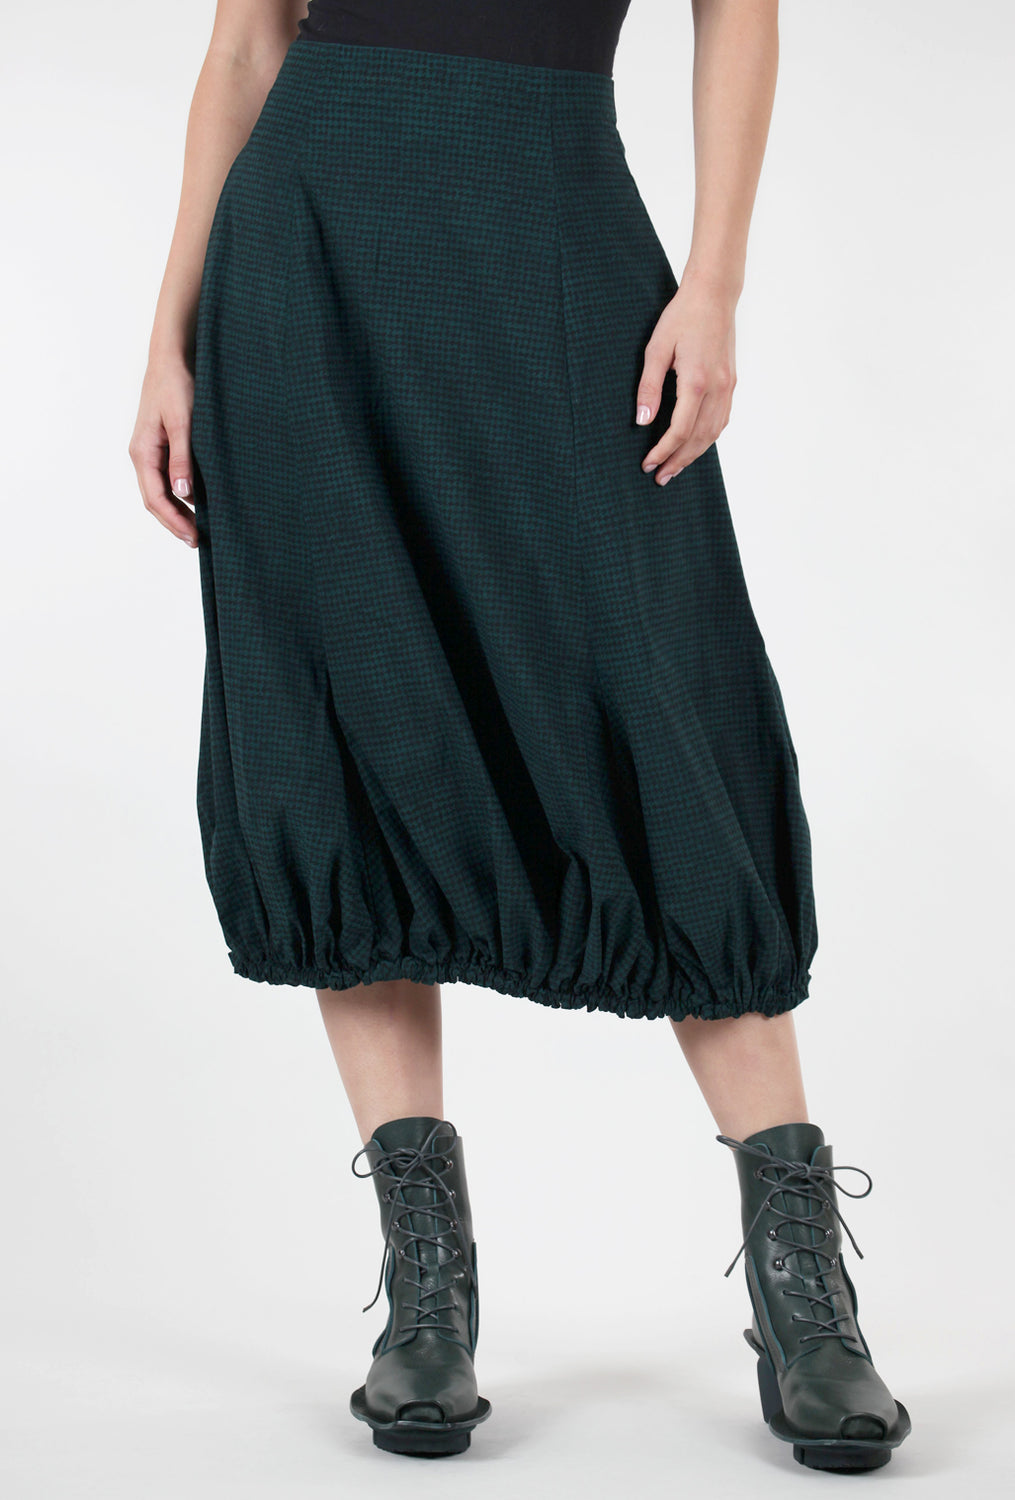 Rundholz Sig Stretch Bubble Skirt, Forest Check 